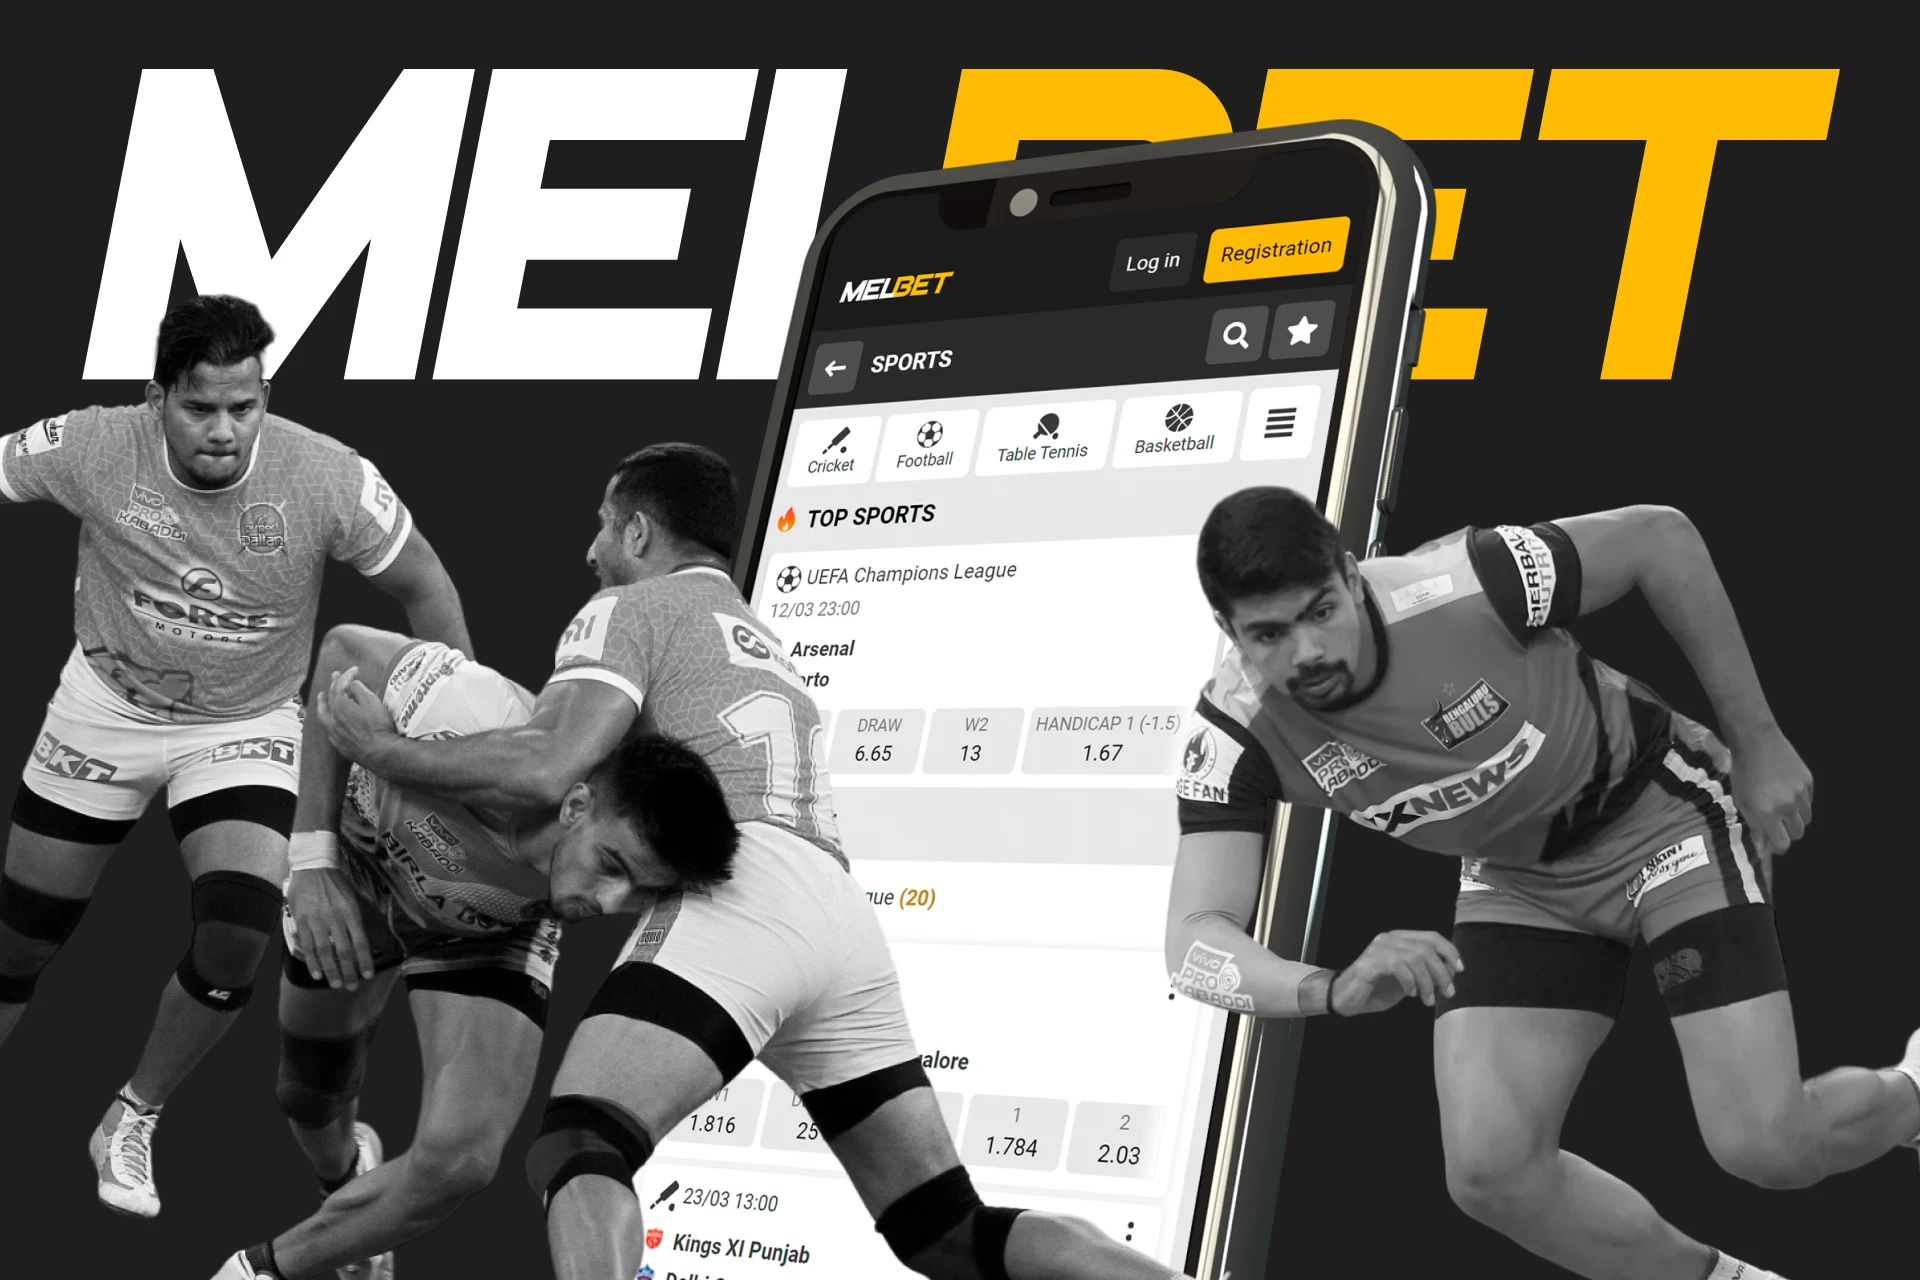 Place your bets on Kabaddi through the Melbet mobile app.